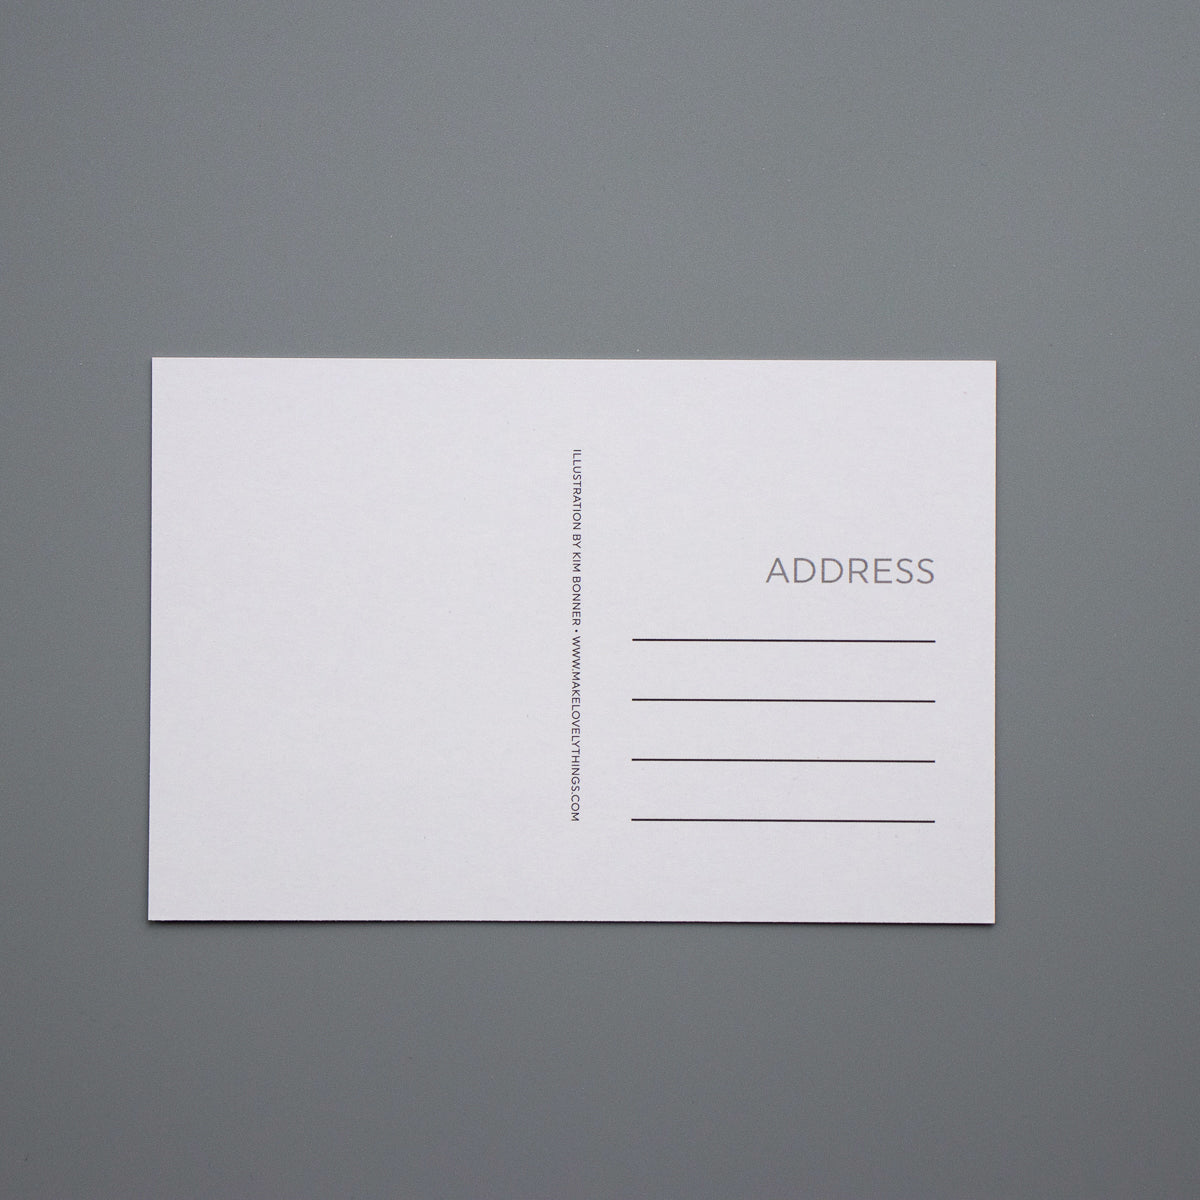 The back of the Identity postcards feature space for writing a message and space to add the address of the person you are mailing the postcard to.